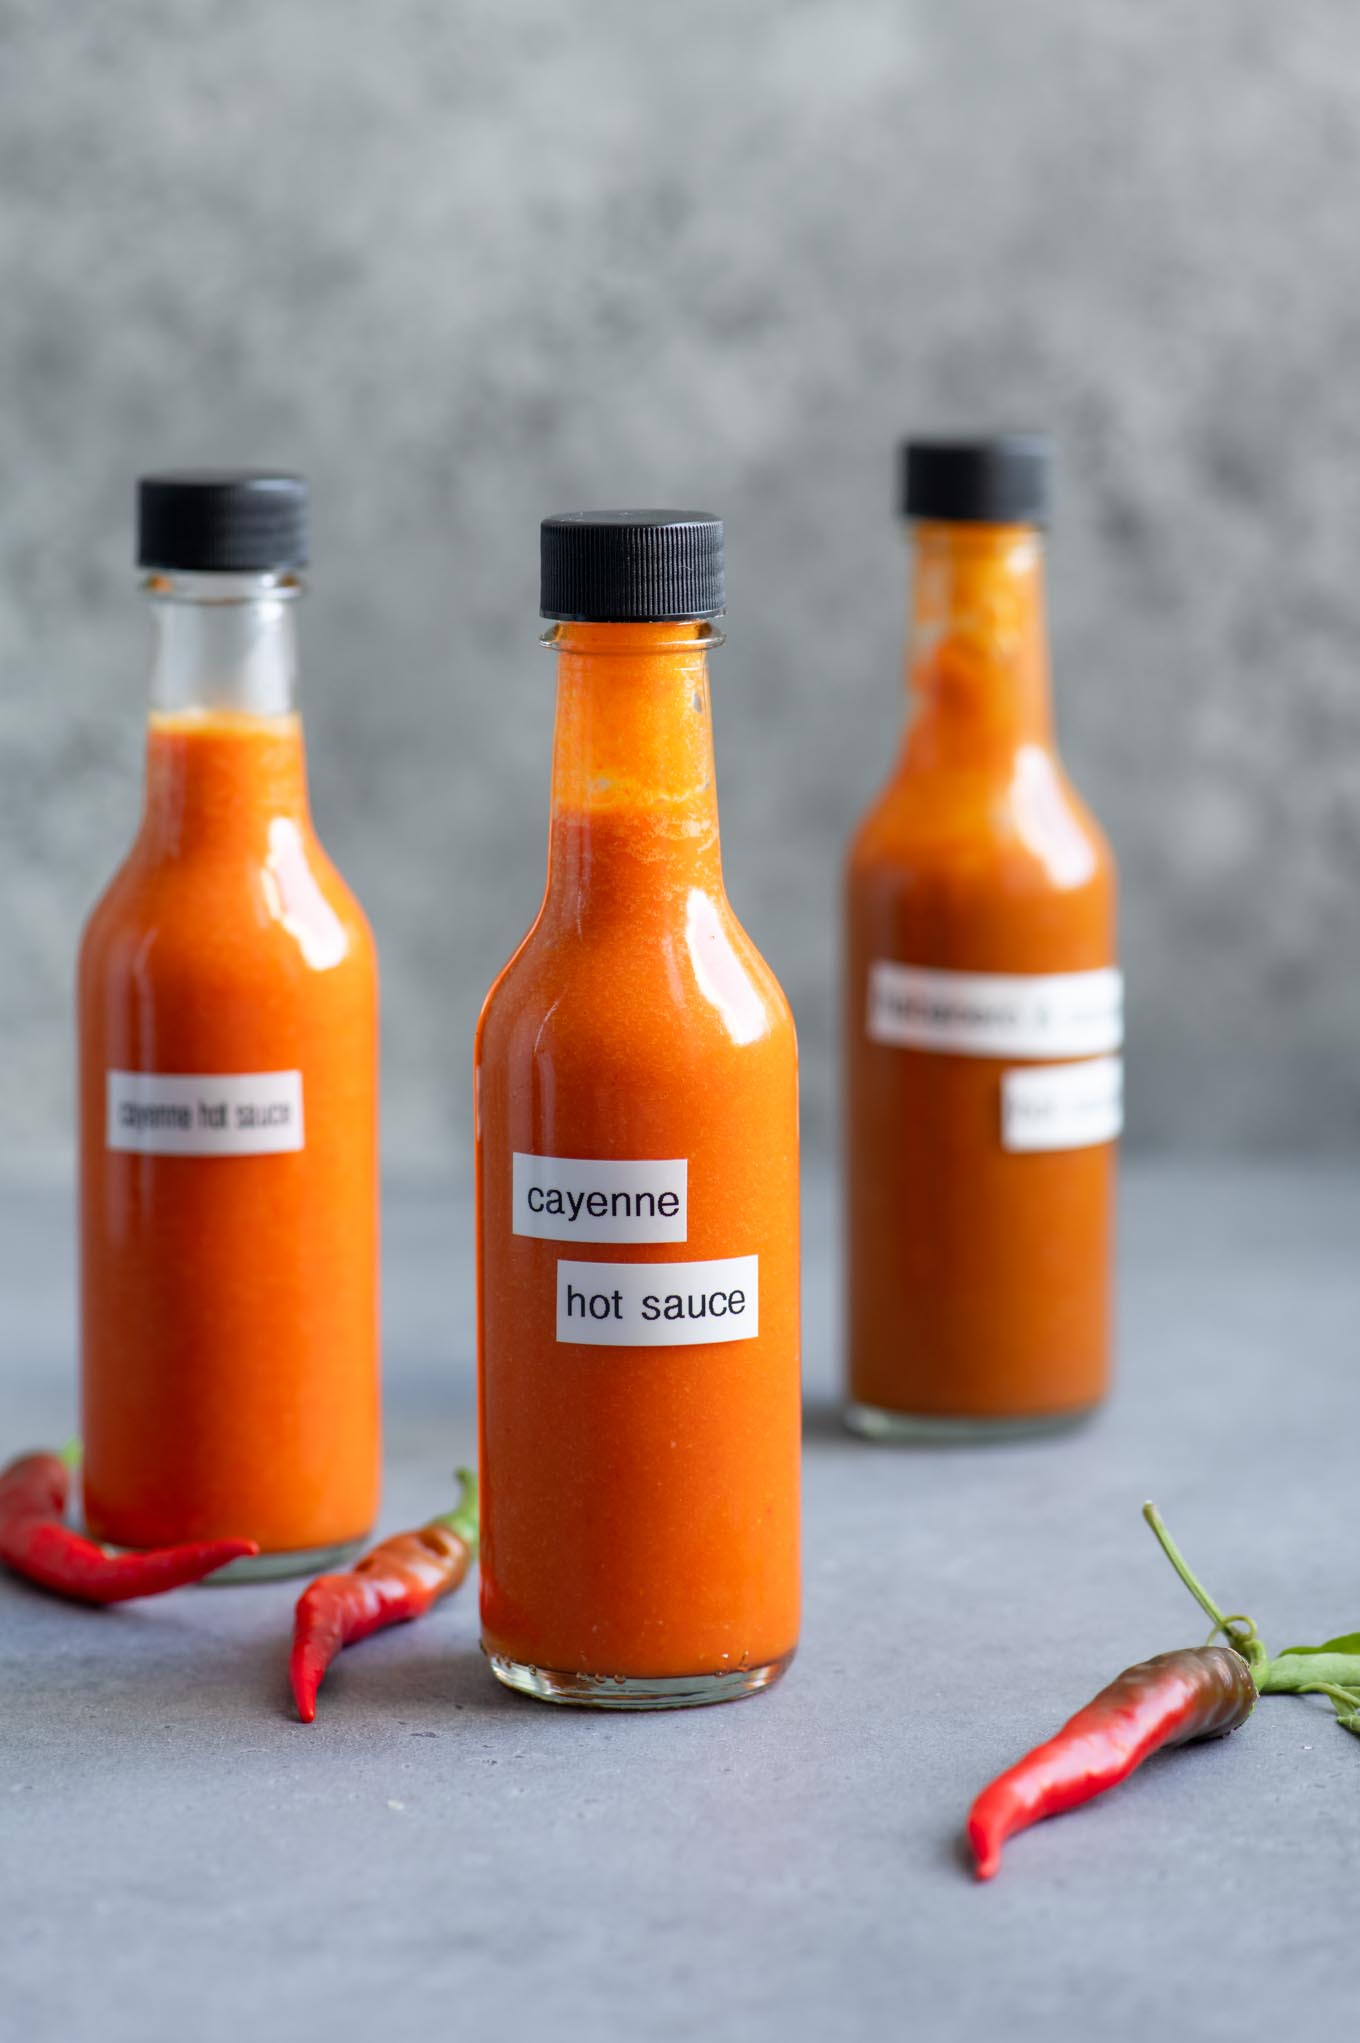 How Tabasco's Hottest-Ever Sauce Is Made